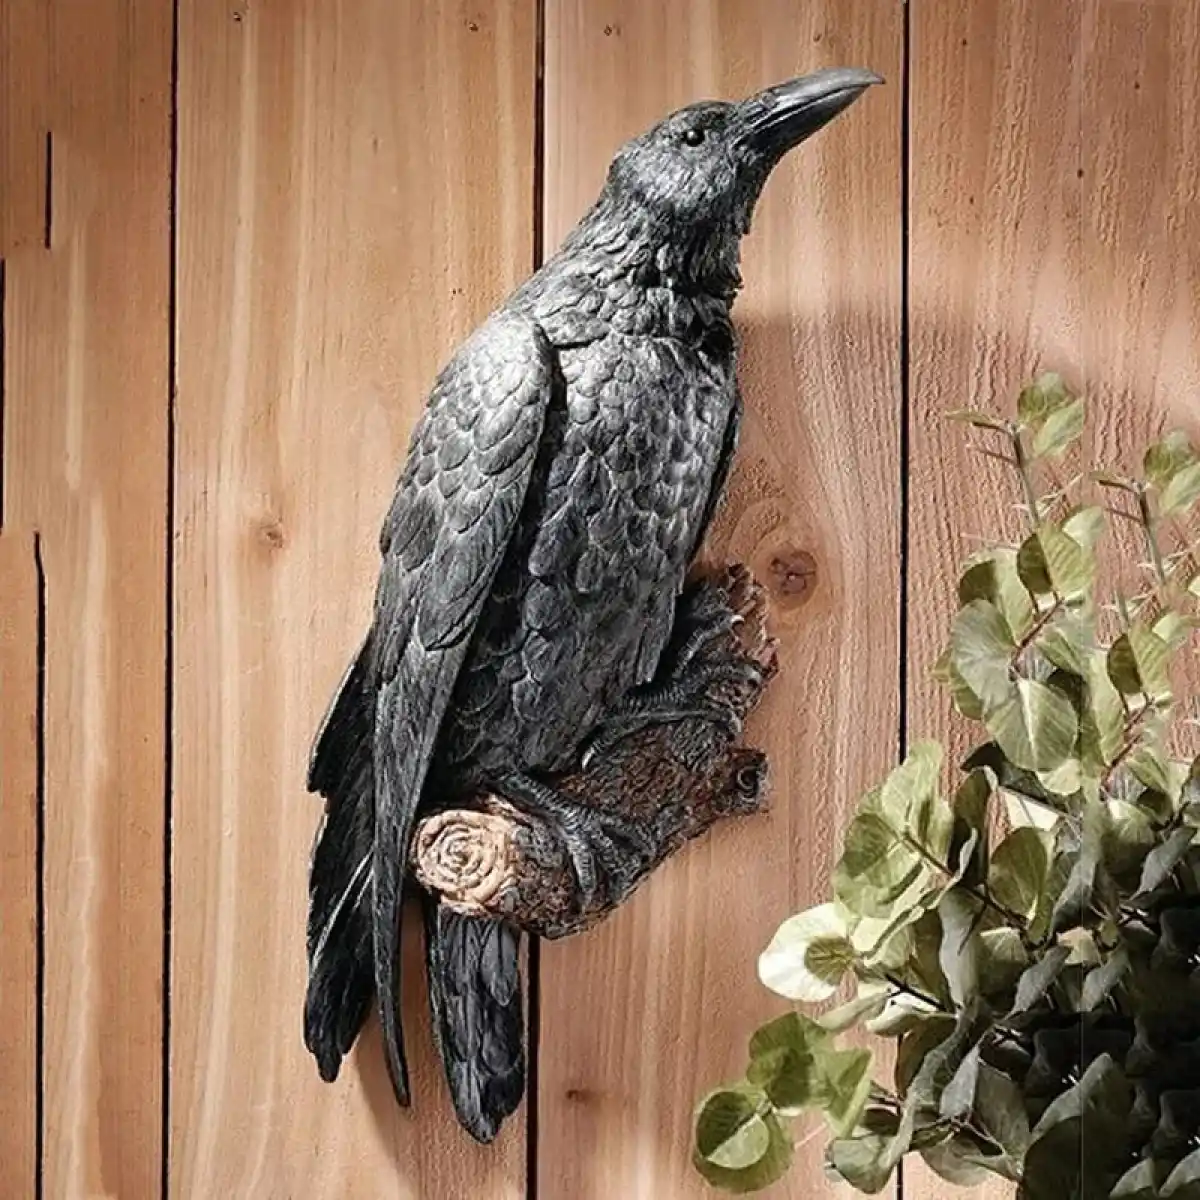 The seventh shoutout in weird best-selling Halloween dropshipping products is raven statue Halloween decor